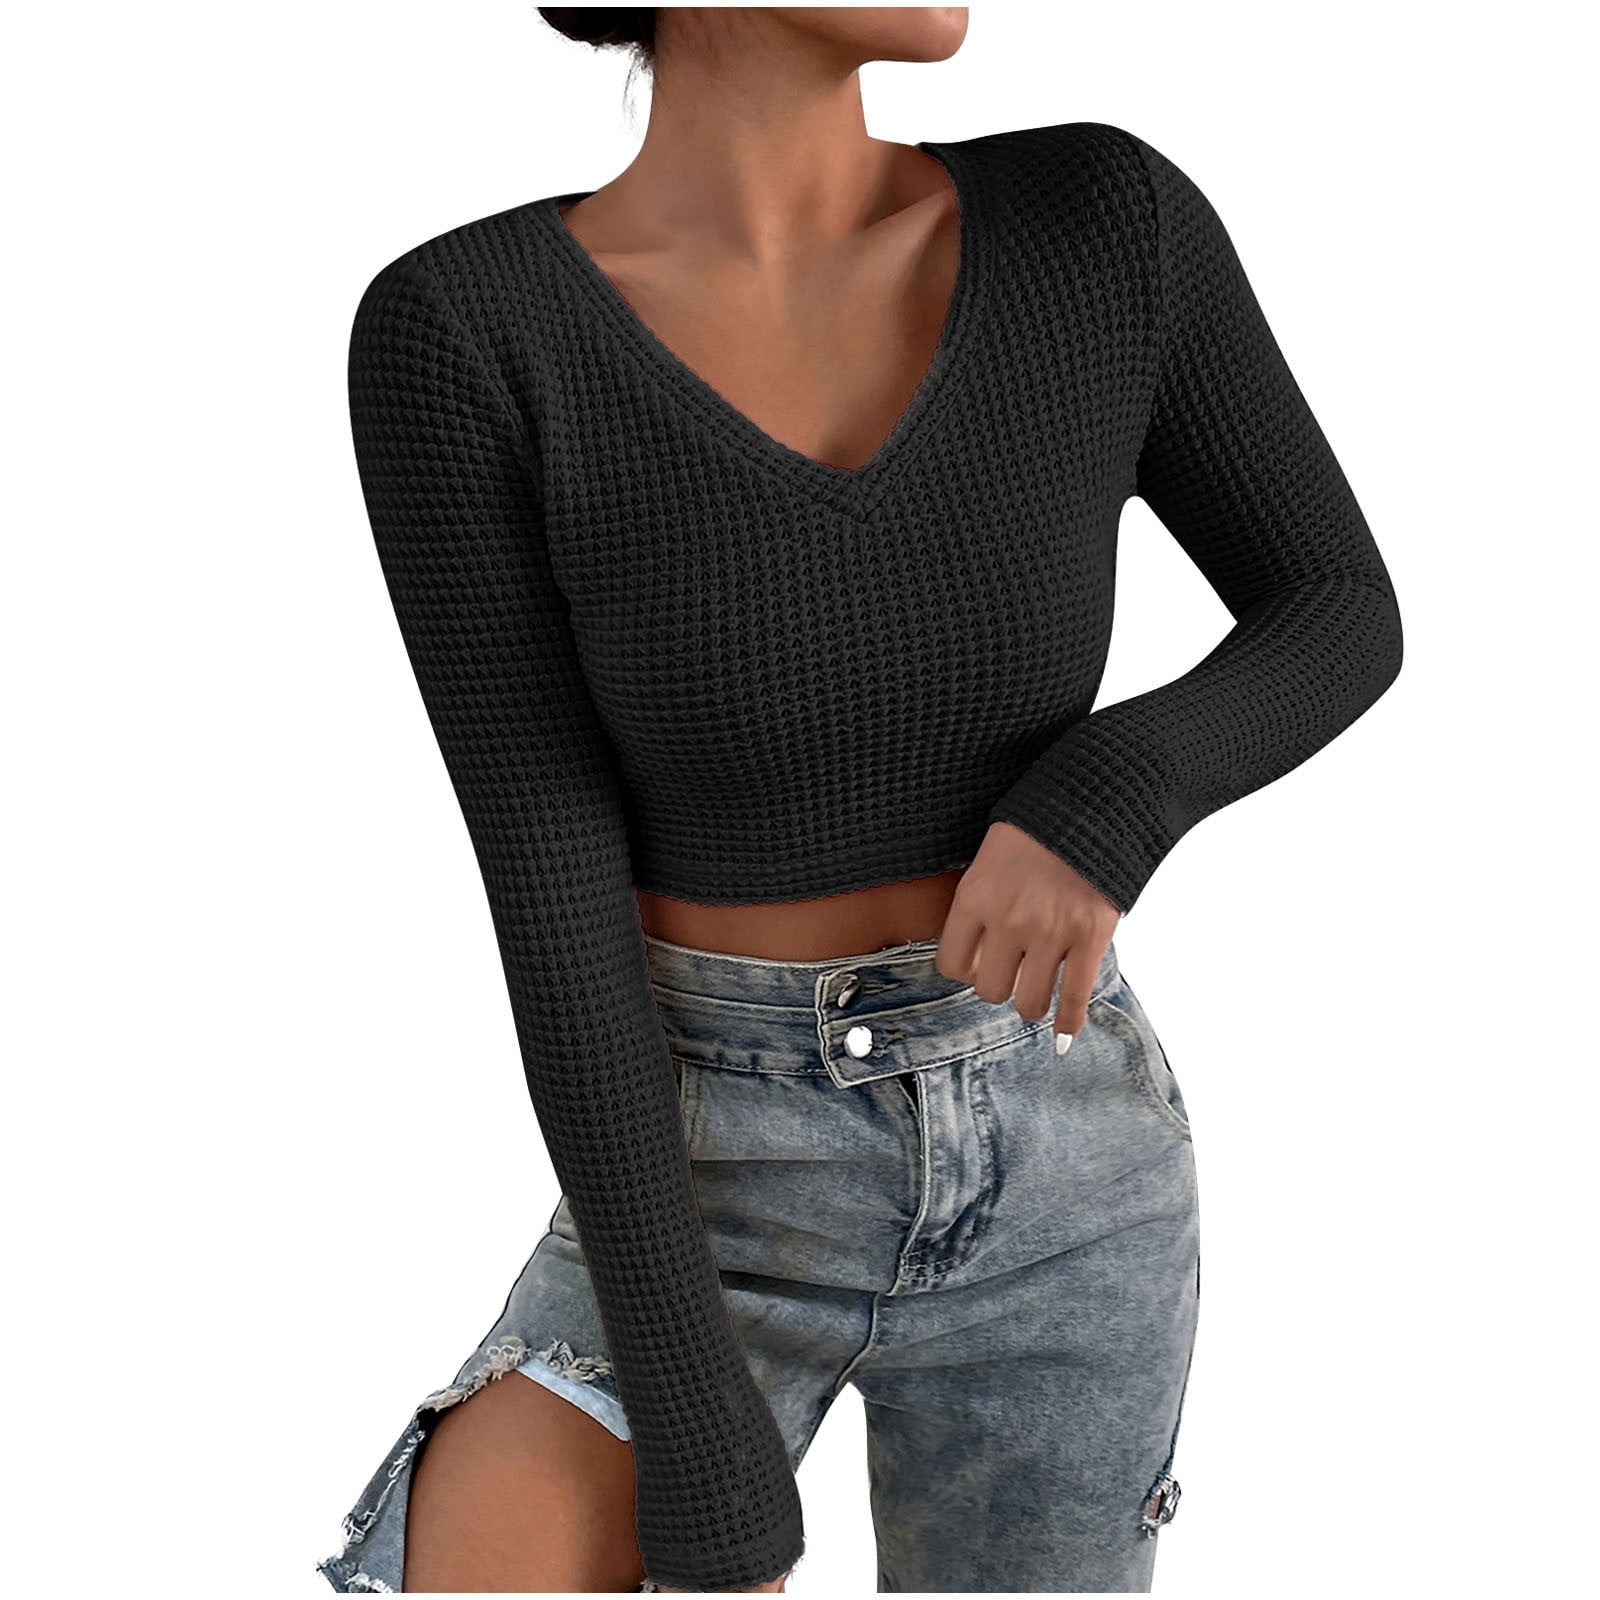 JGGSPWM Womens Waffle Tshirt Spring Sleeve Crop Pullover Tunic Tee Black Solid Y2ktops V Long Blouse Shirts S Tops Knit Slim Fit Neck